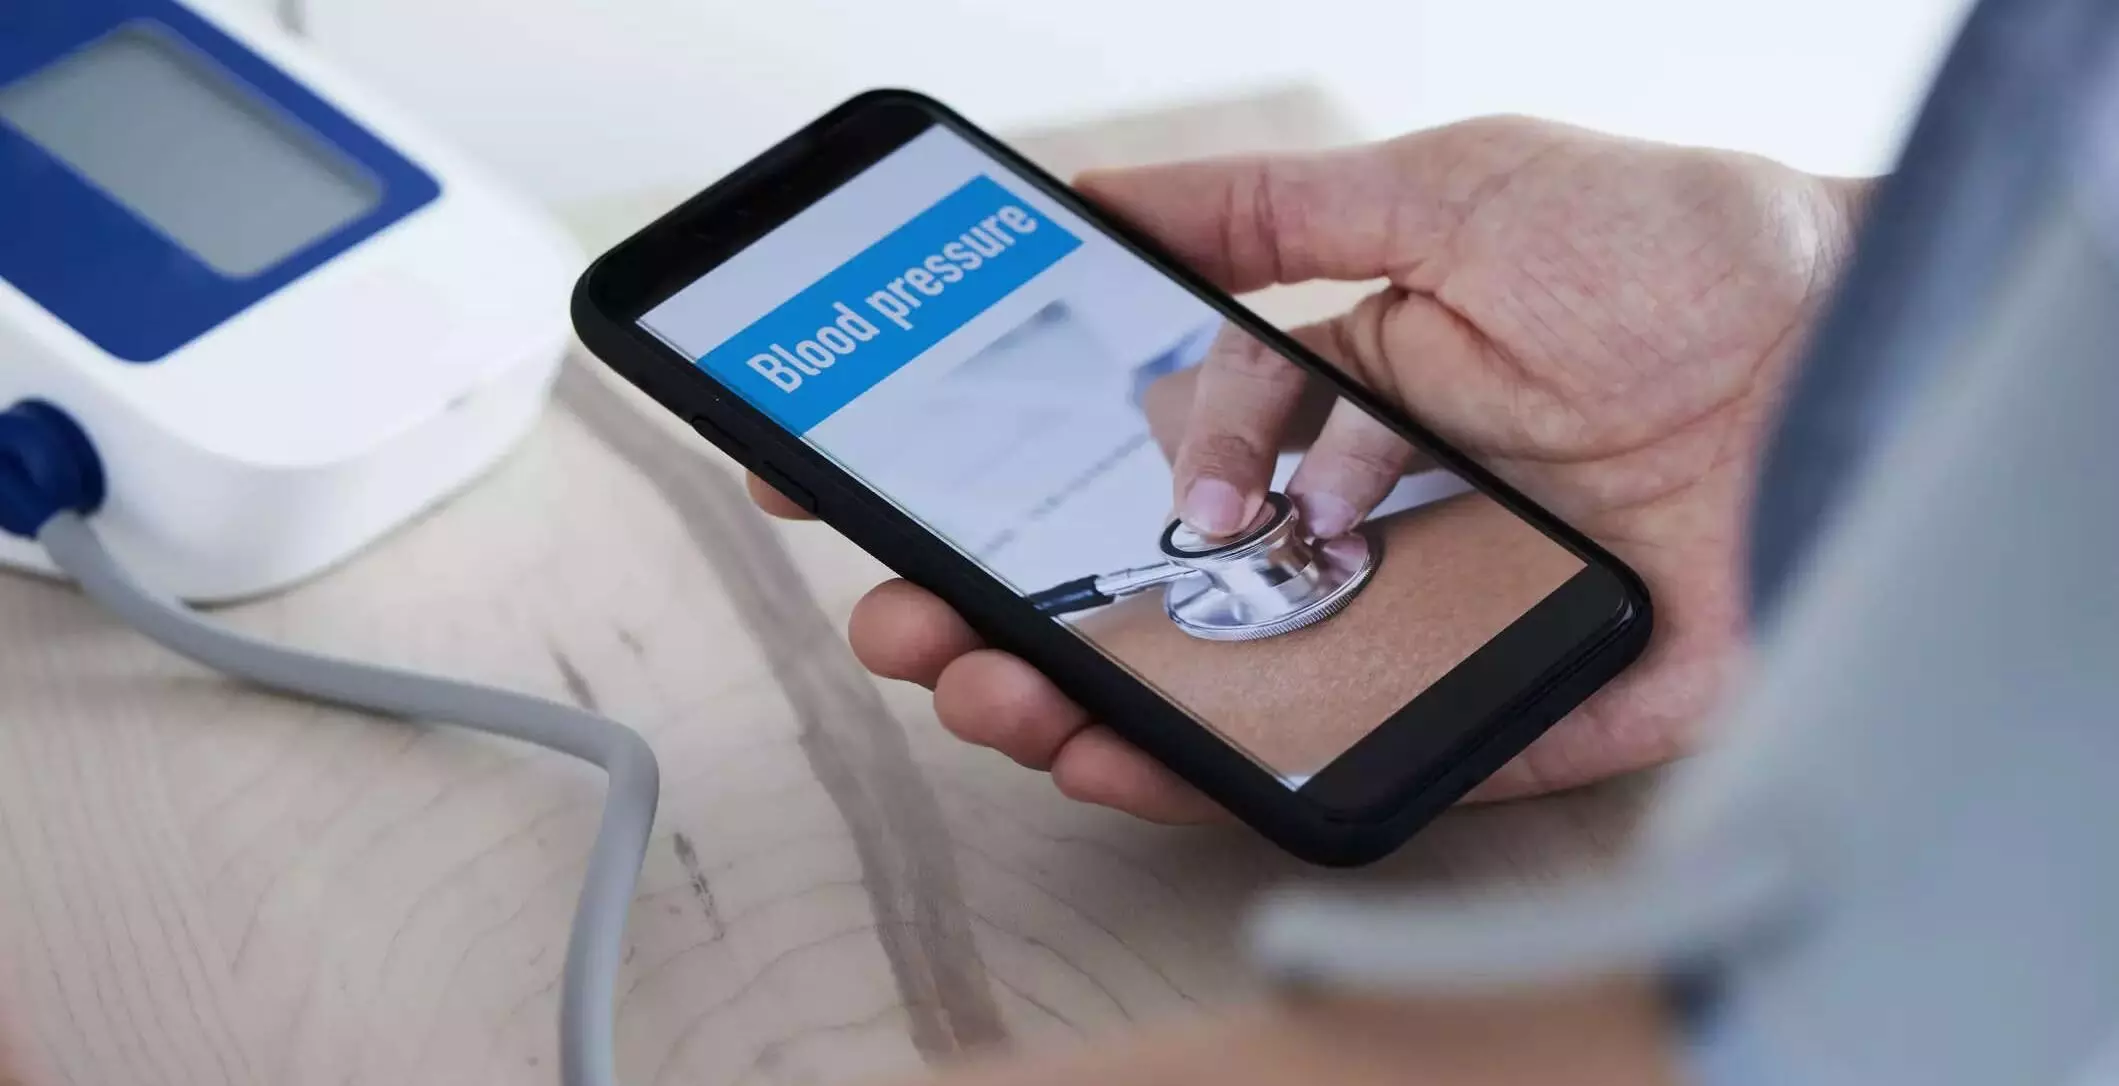 Blood Pressure Monitor at users fingertip with new low-cost smartphone attachment, custom app